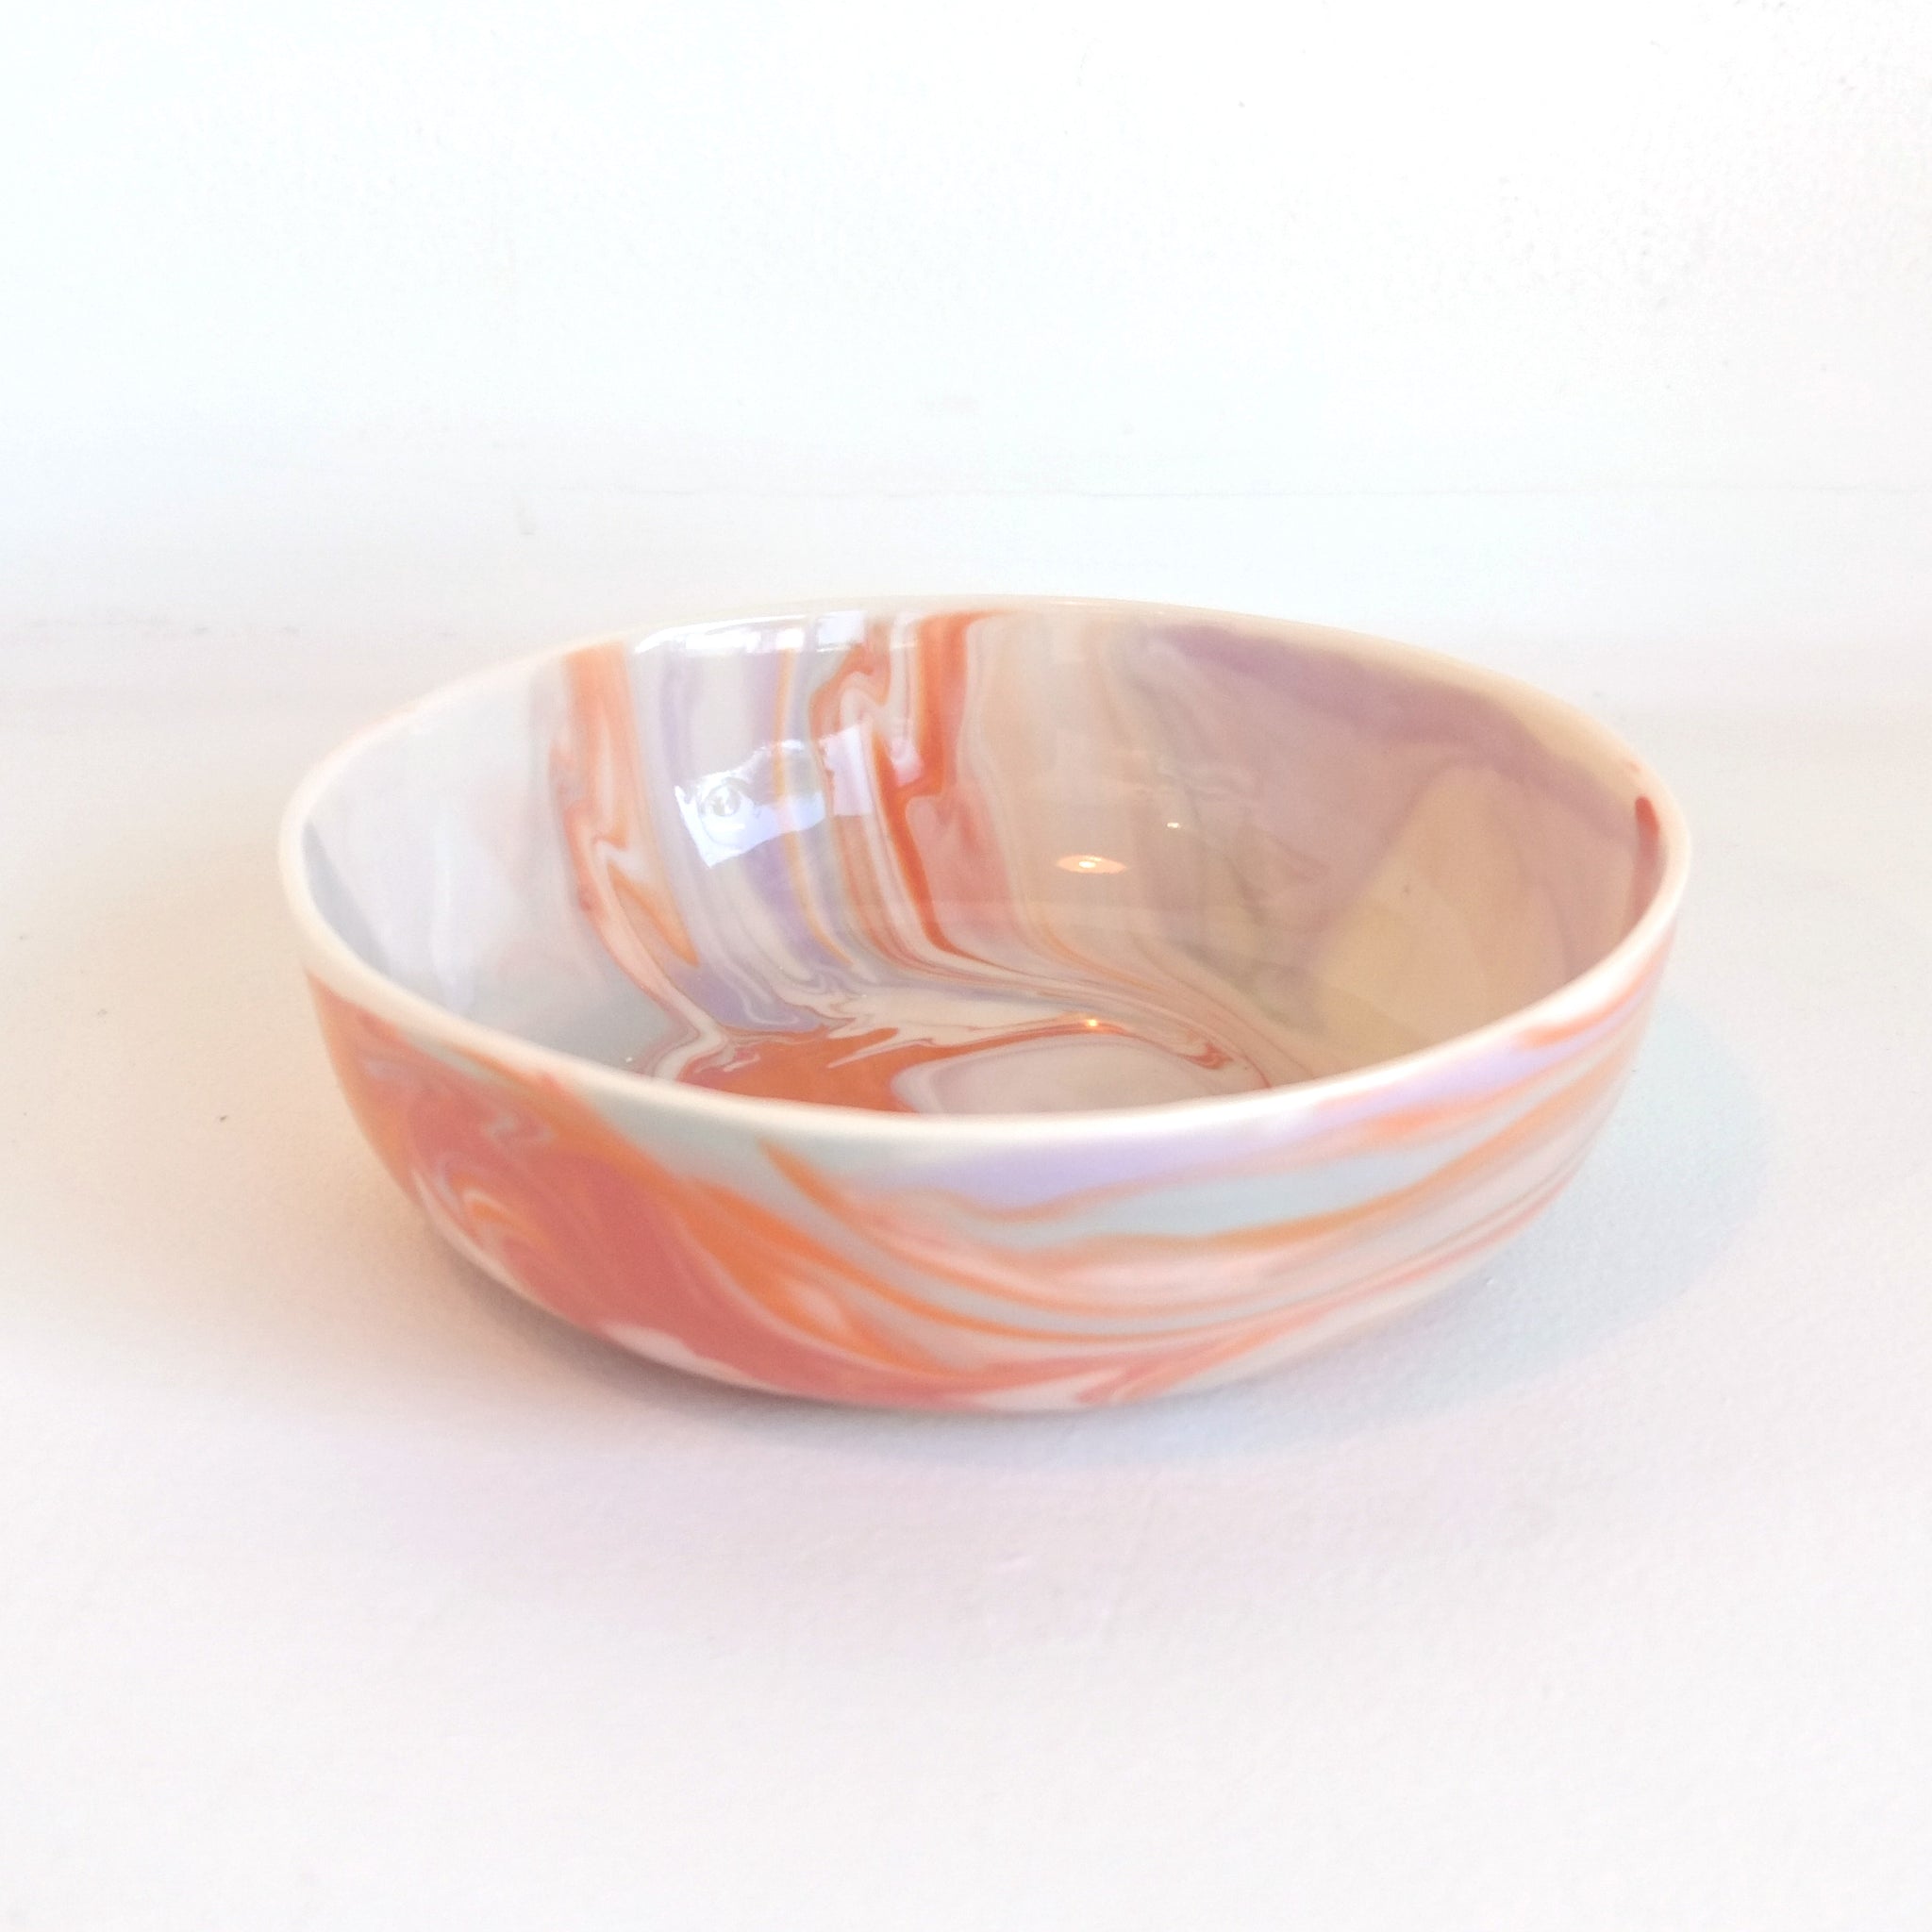 Marbled California Terra Cotta Sunset Cereal Bowl